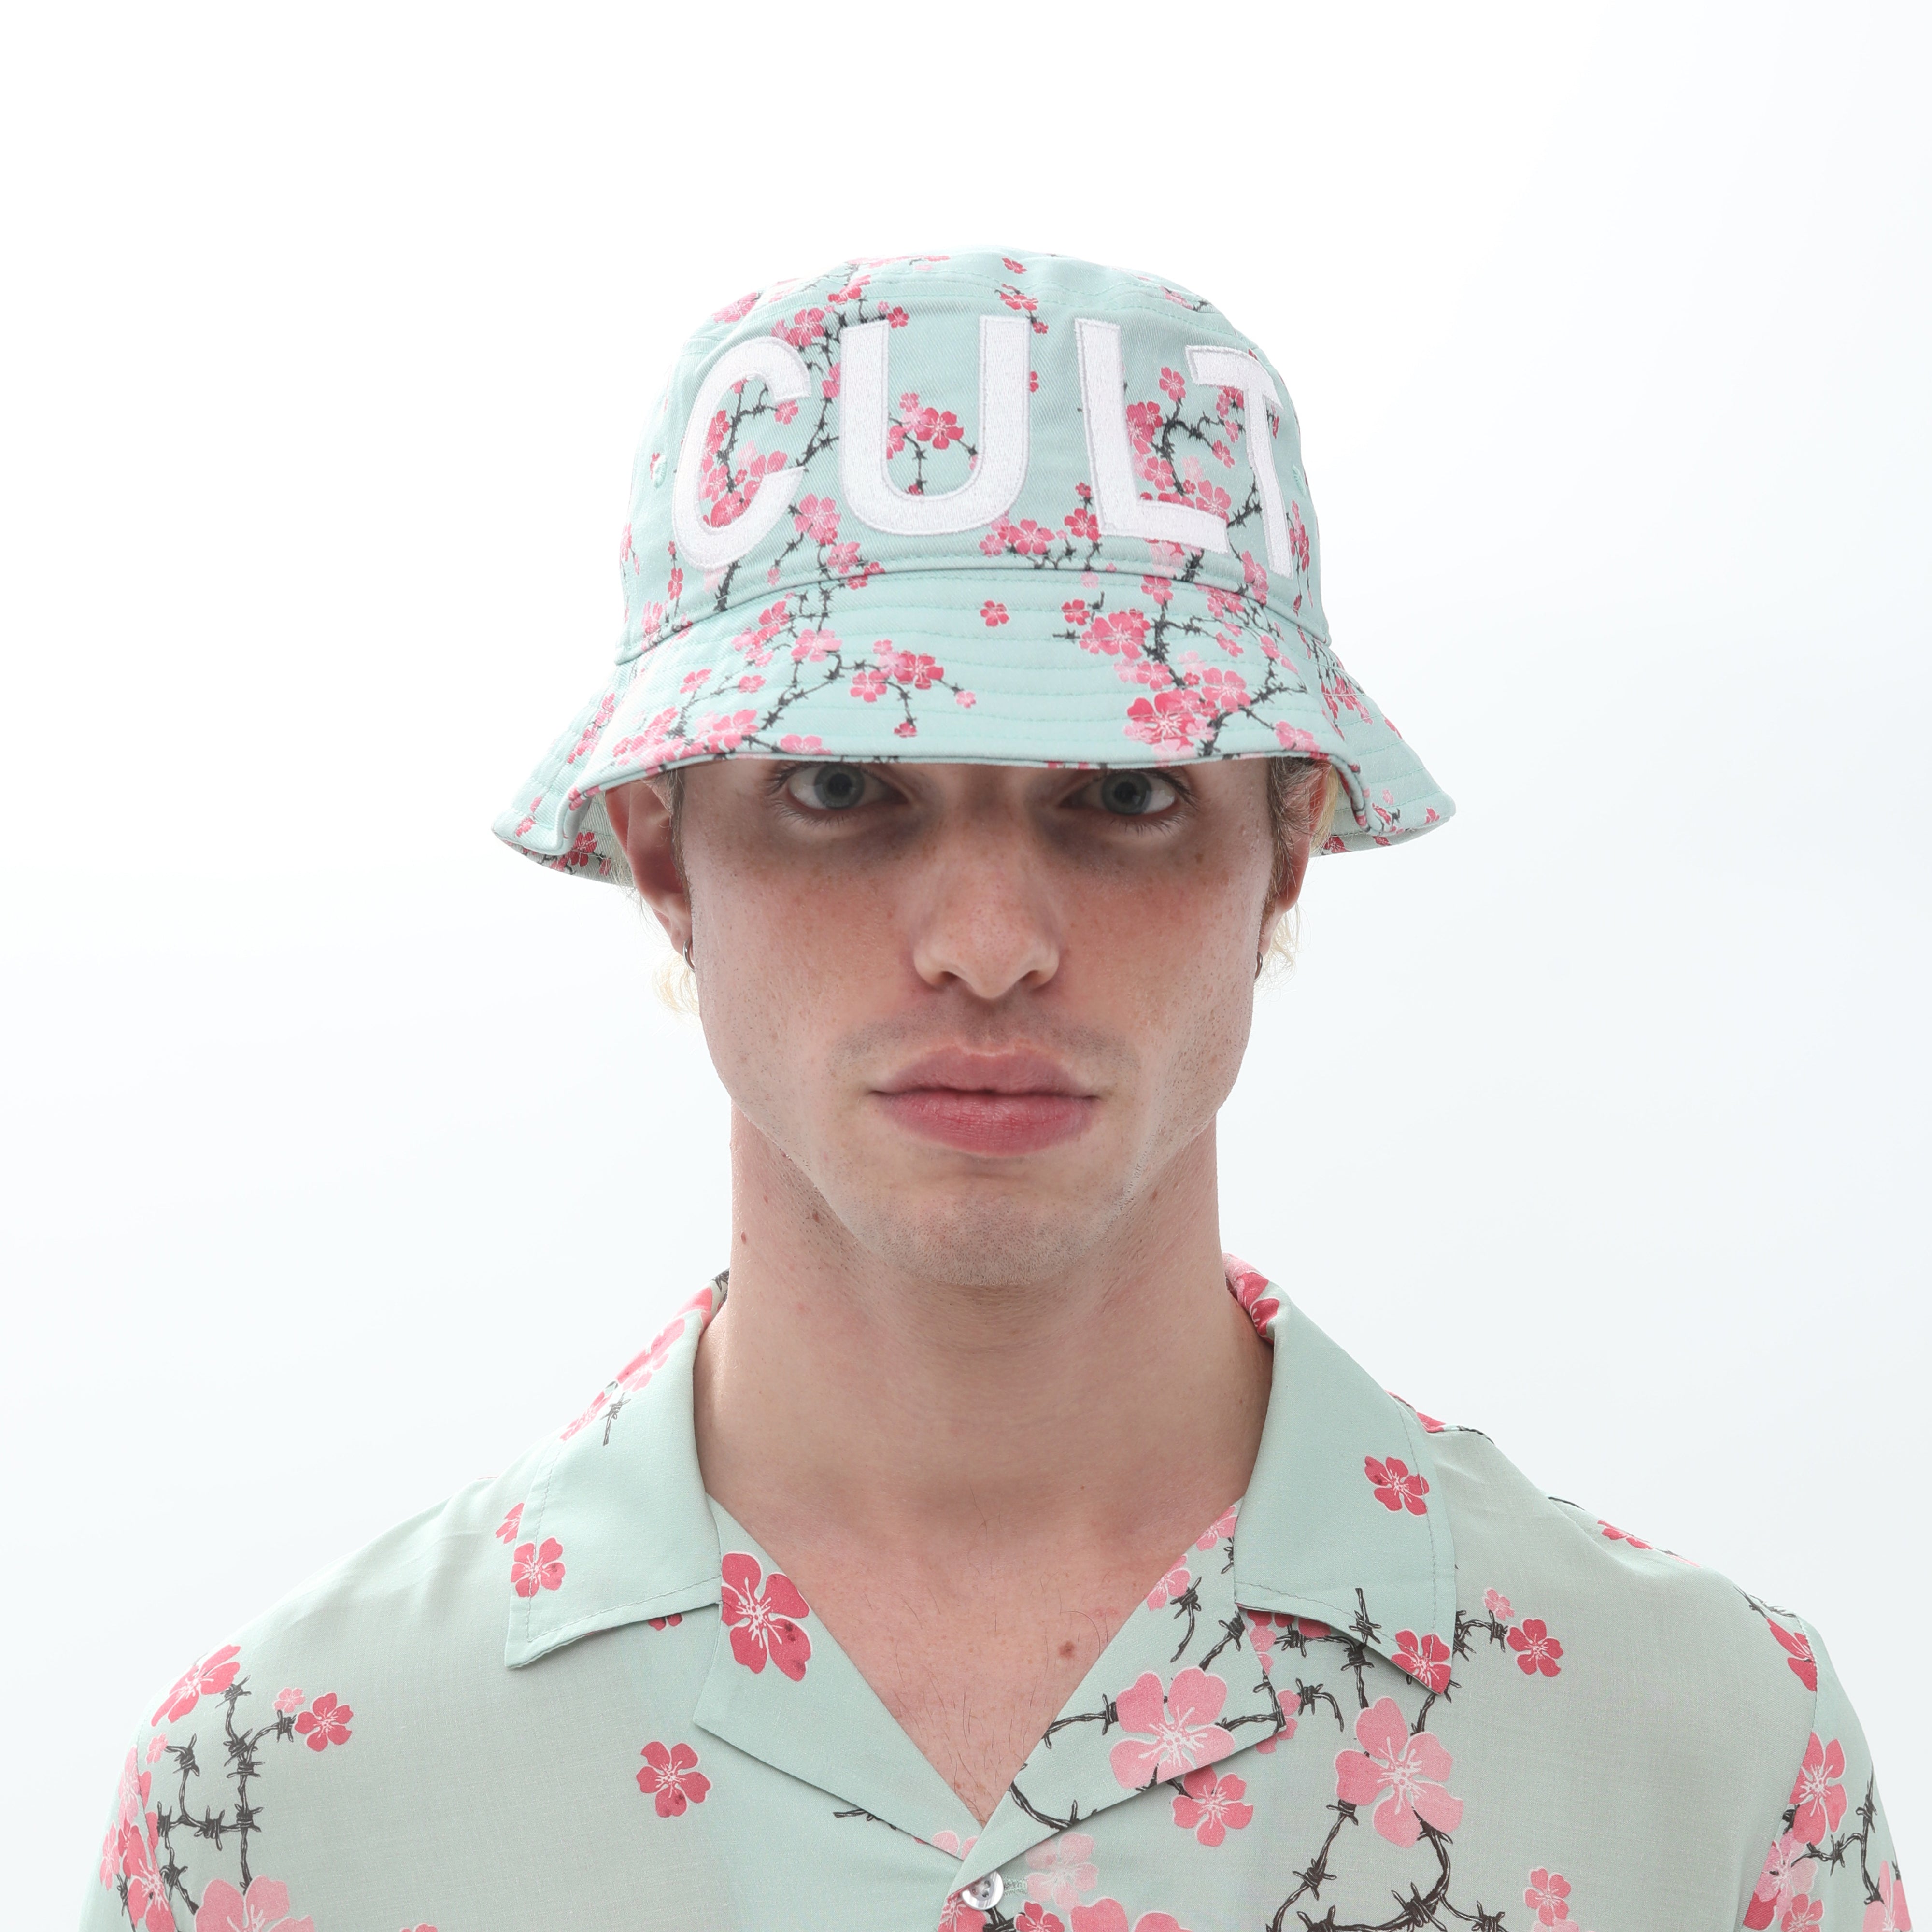 Cult of Individuality Bucket Hat in Cherry Blossom - Green - One Size